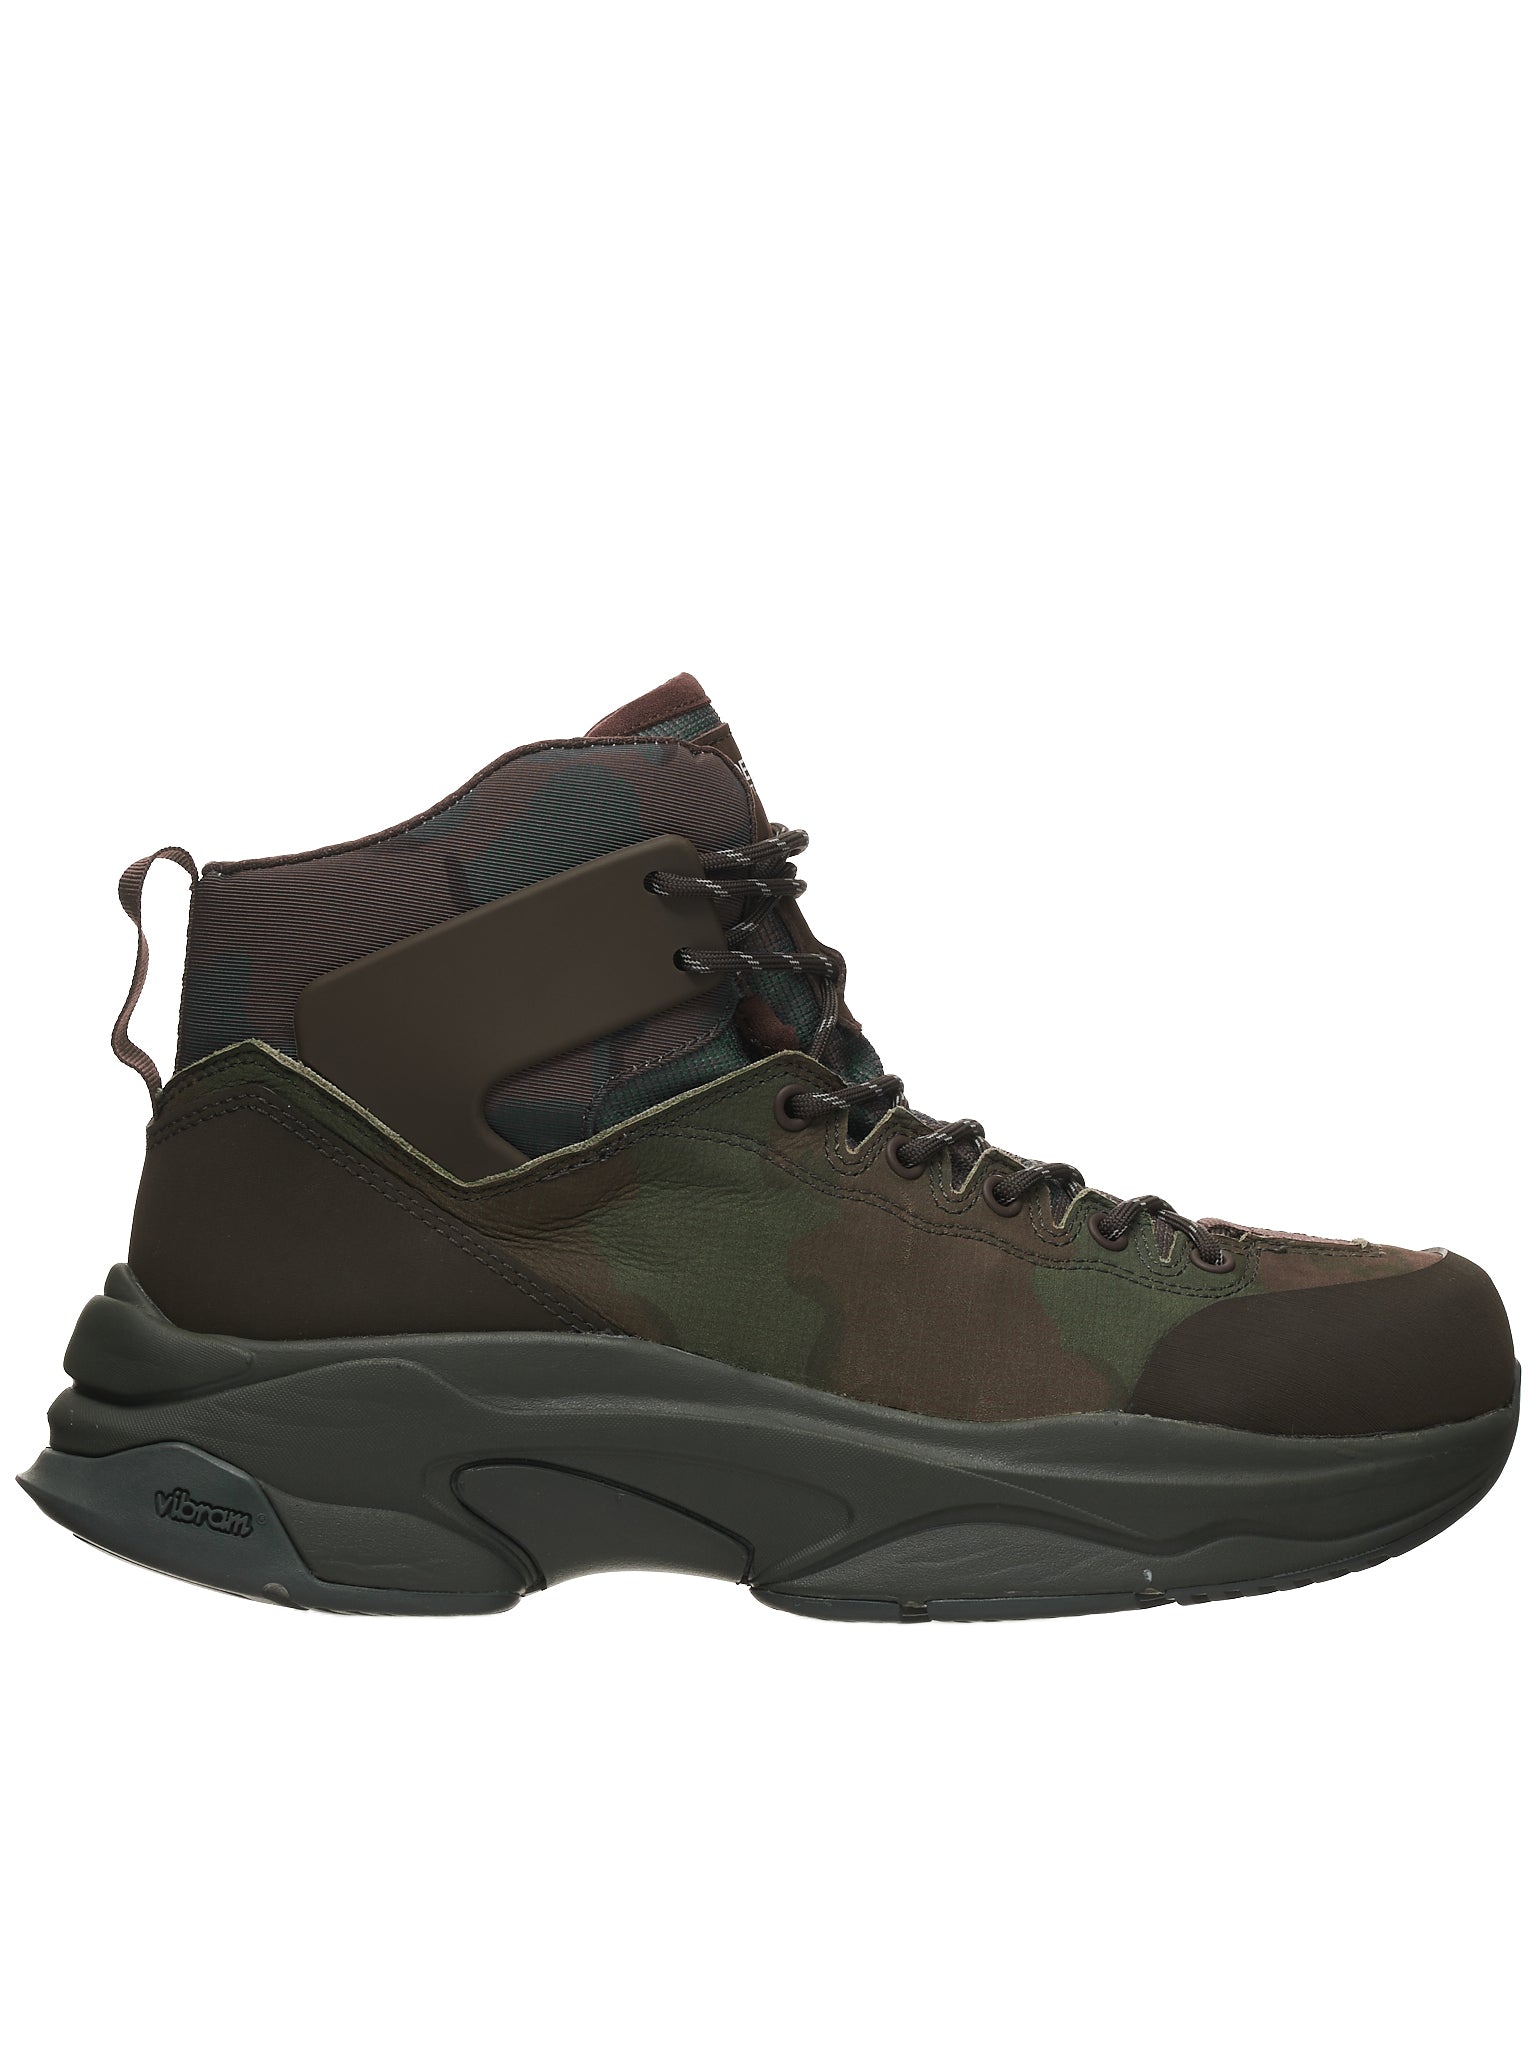 Undercover Camo Boots | H. Lorenzo - front